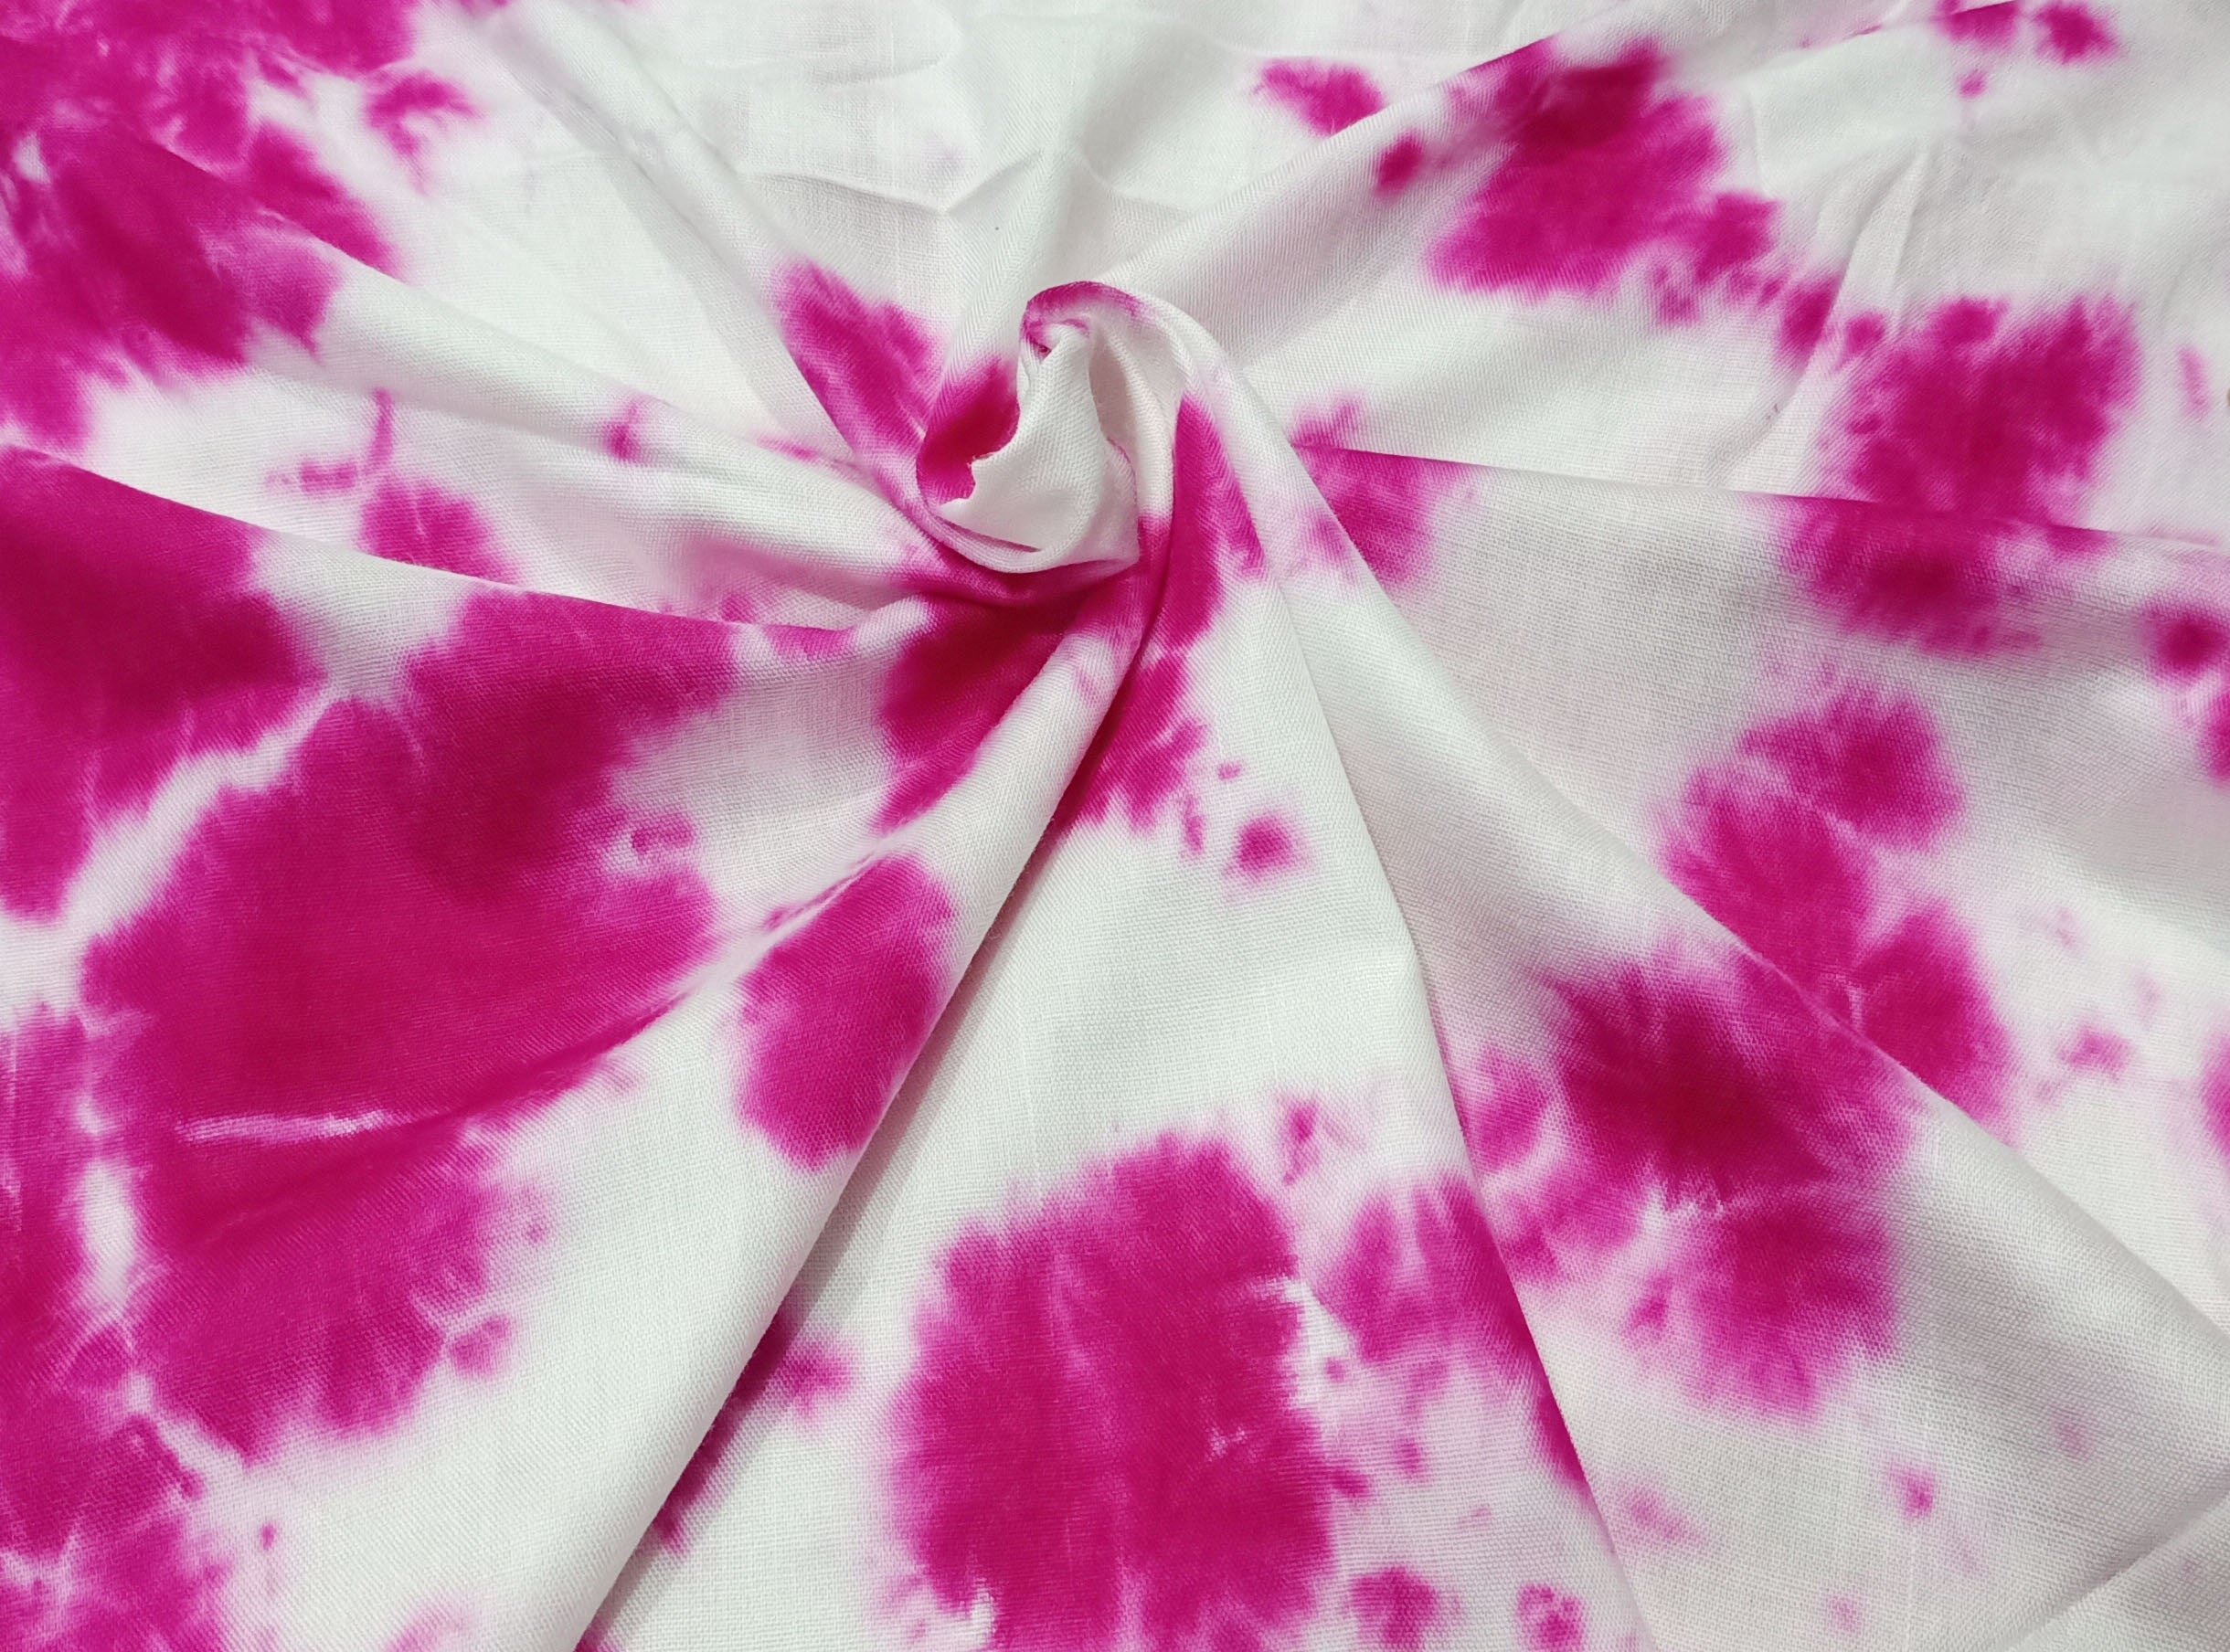 Pink White Shibori Tie Dye Fabric, Voile Rayon Fabric, Soft Beautiful  Cotton Fabric Indian Sewing Cotton Fabric for Dressmaking, Quilt Craft 